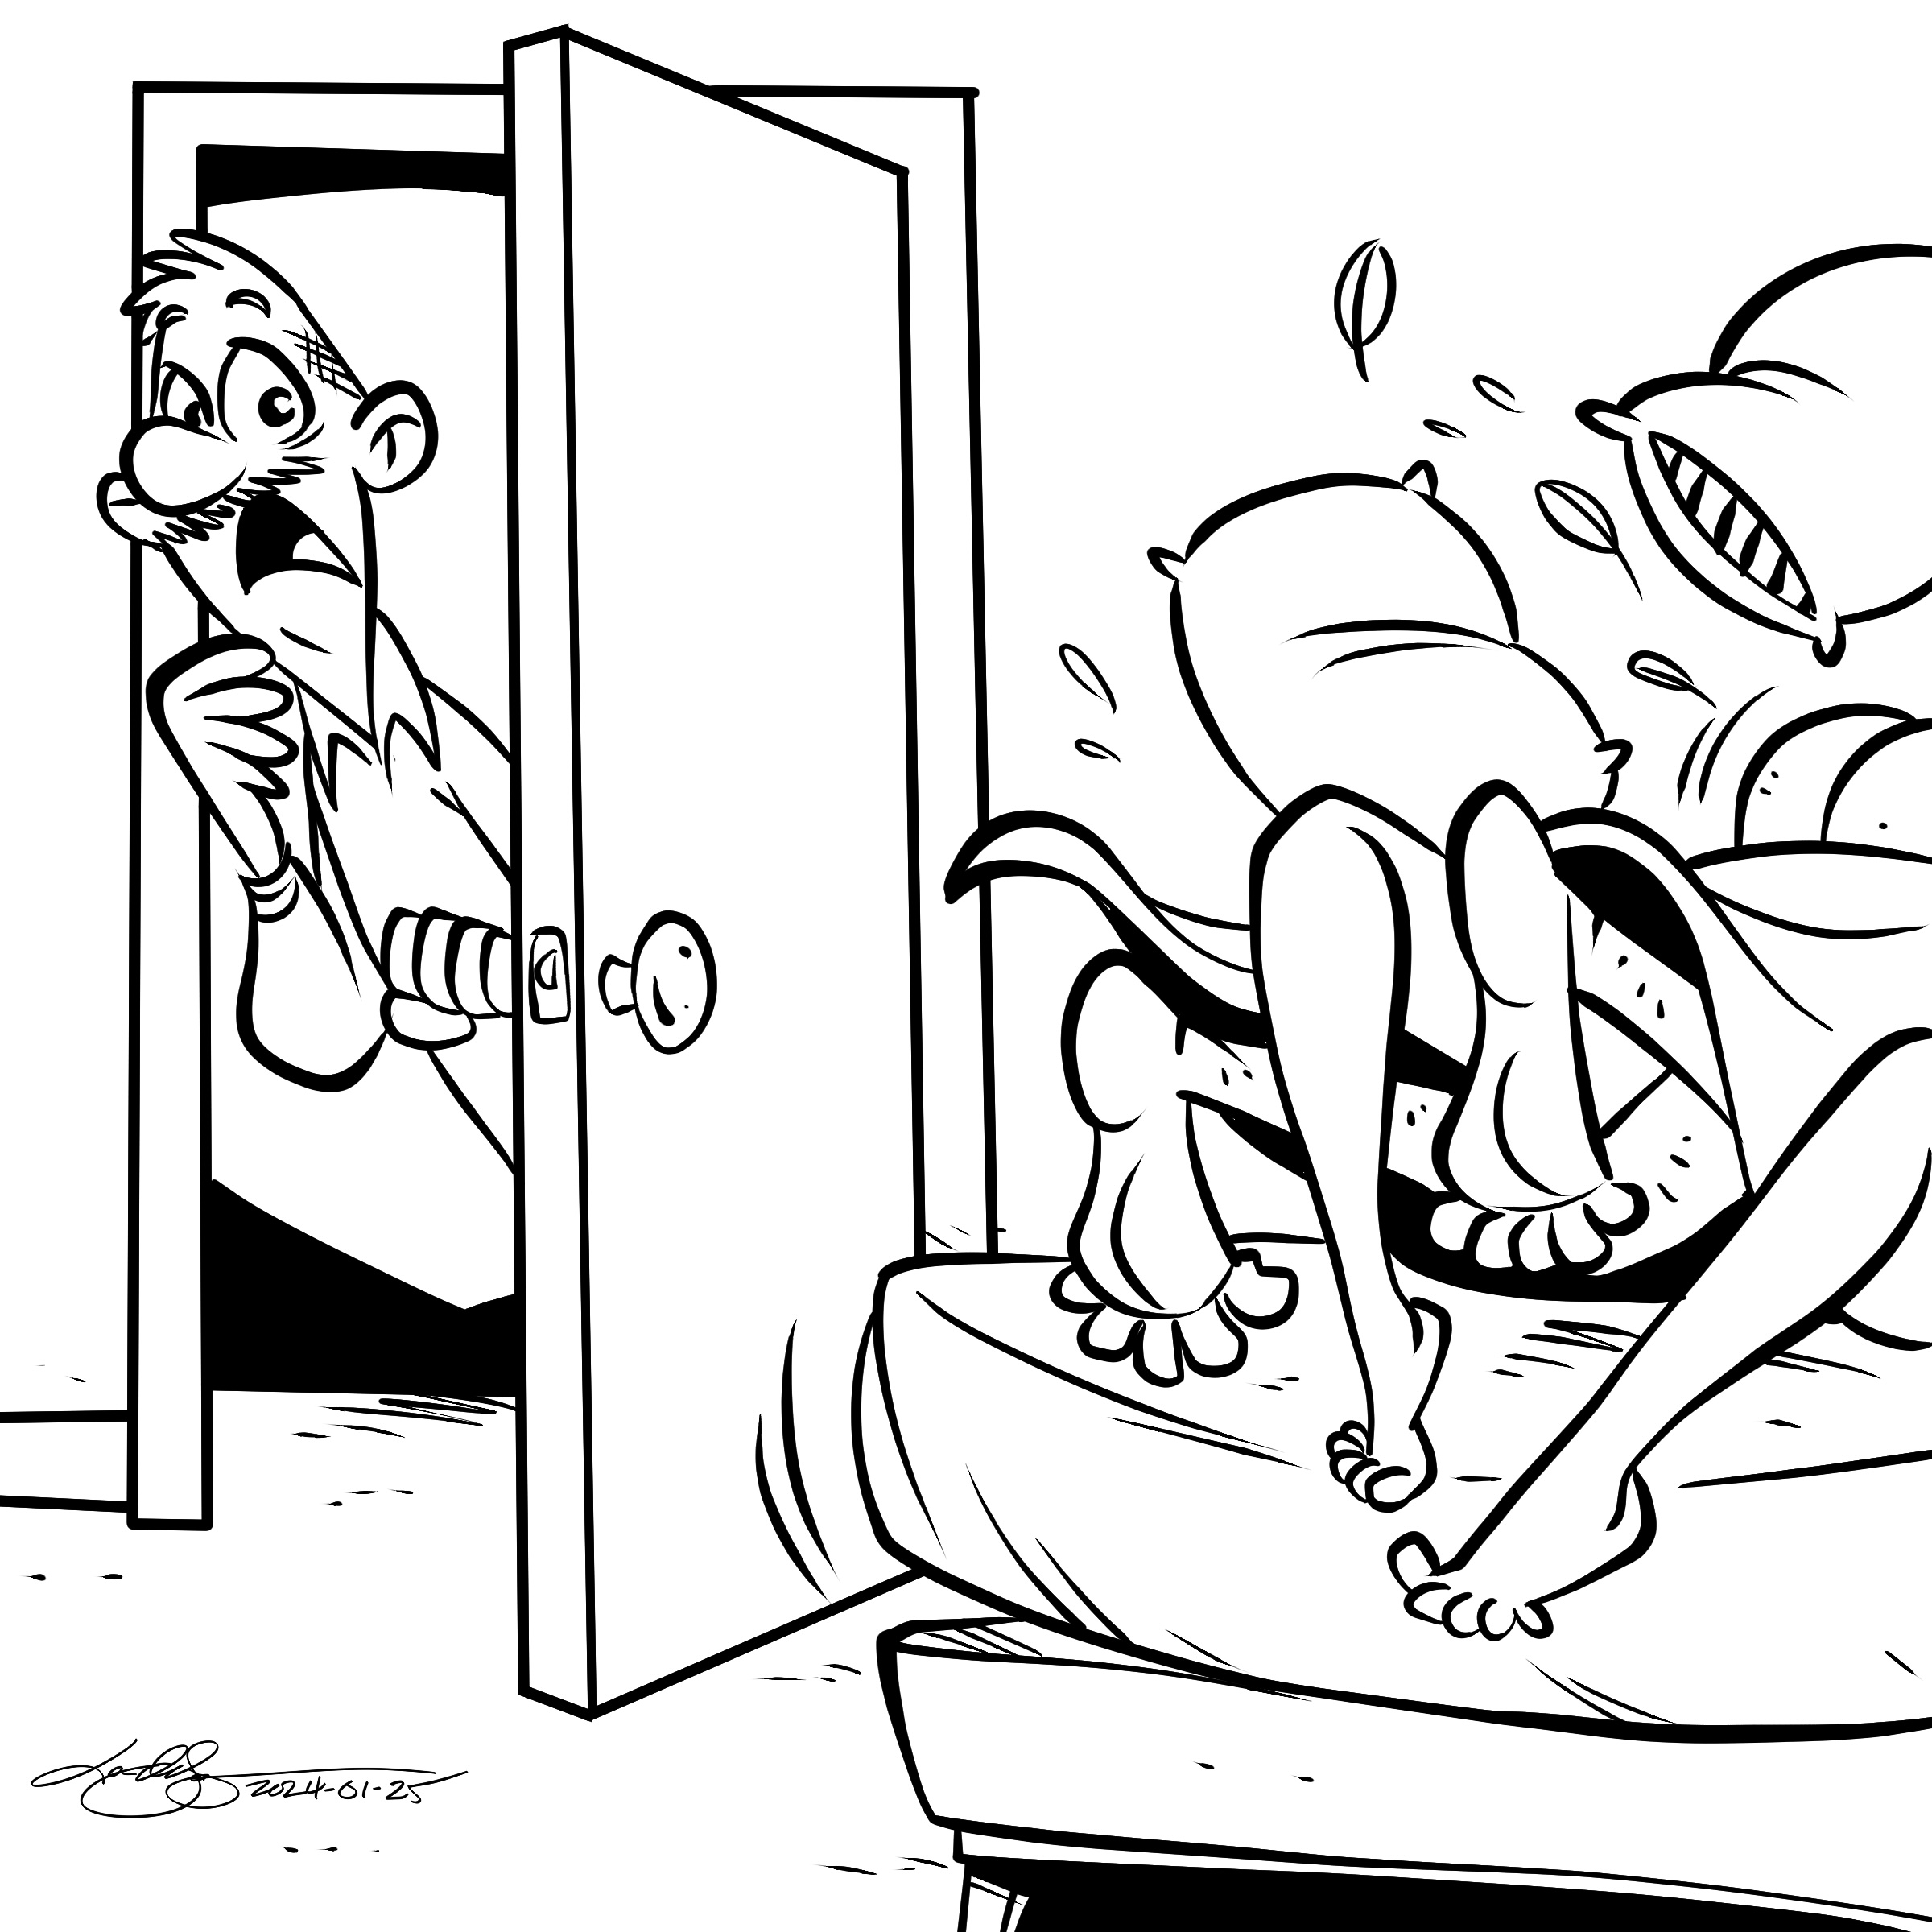 A cartoon drawing of a man opening the door to see two people having vigorous sex on a bed